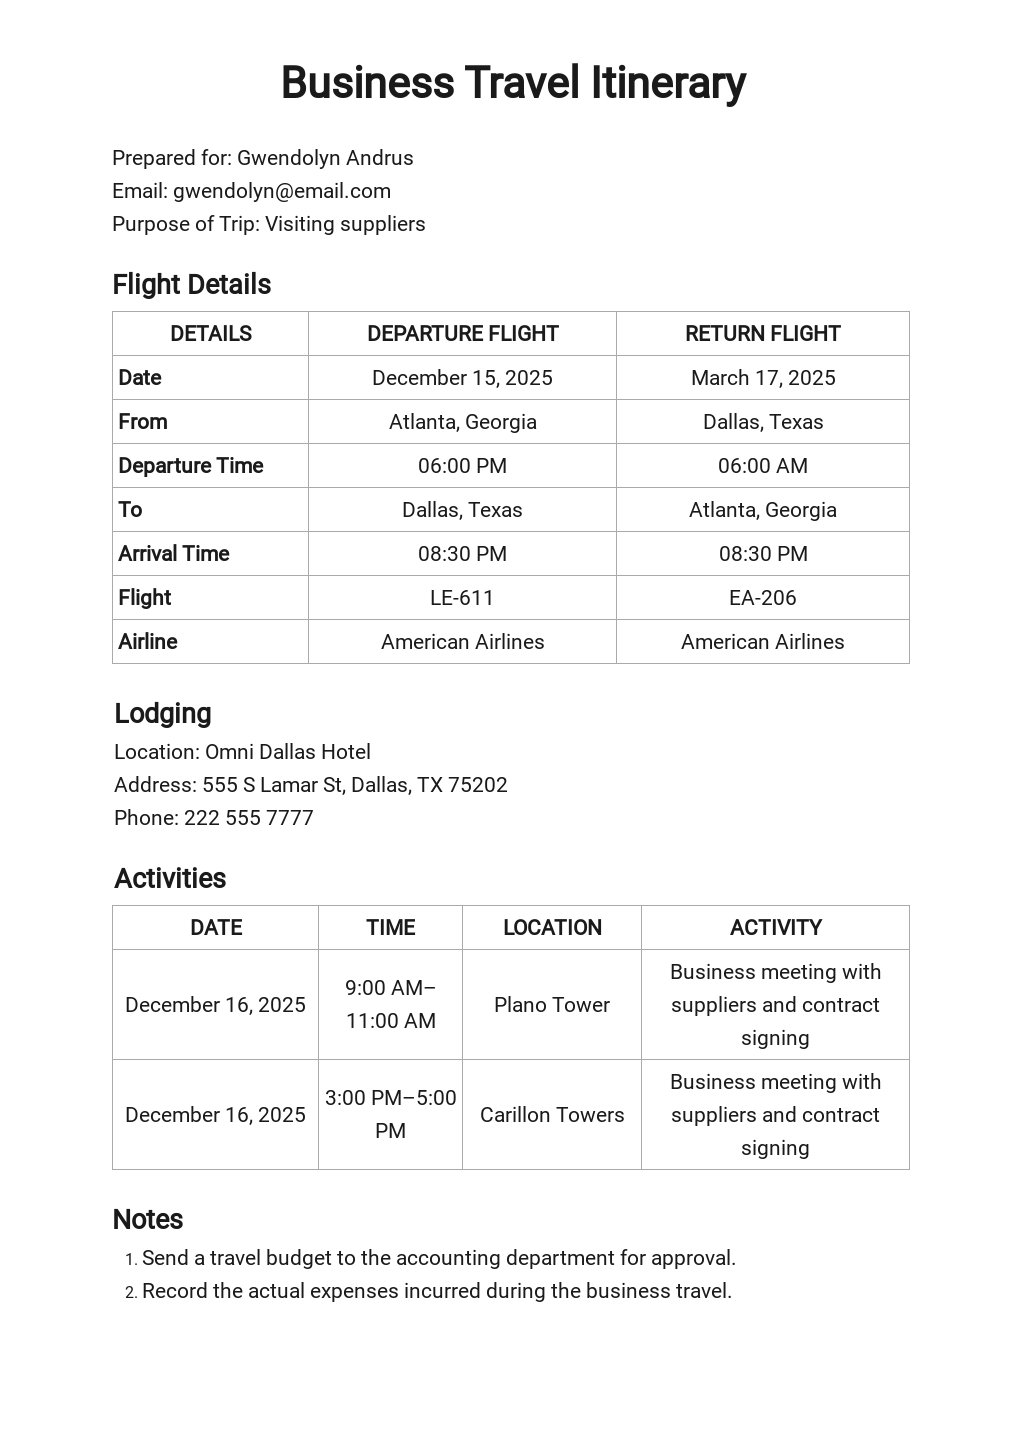 Travel Itinerary Spreadsheet Template in Google Docs, Word